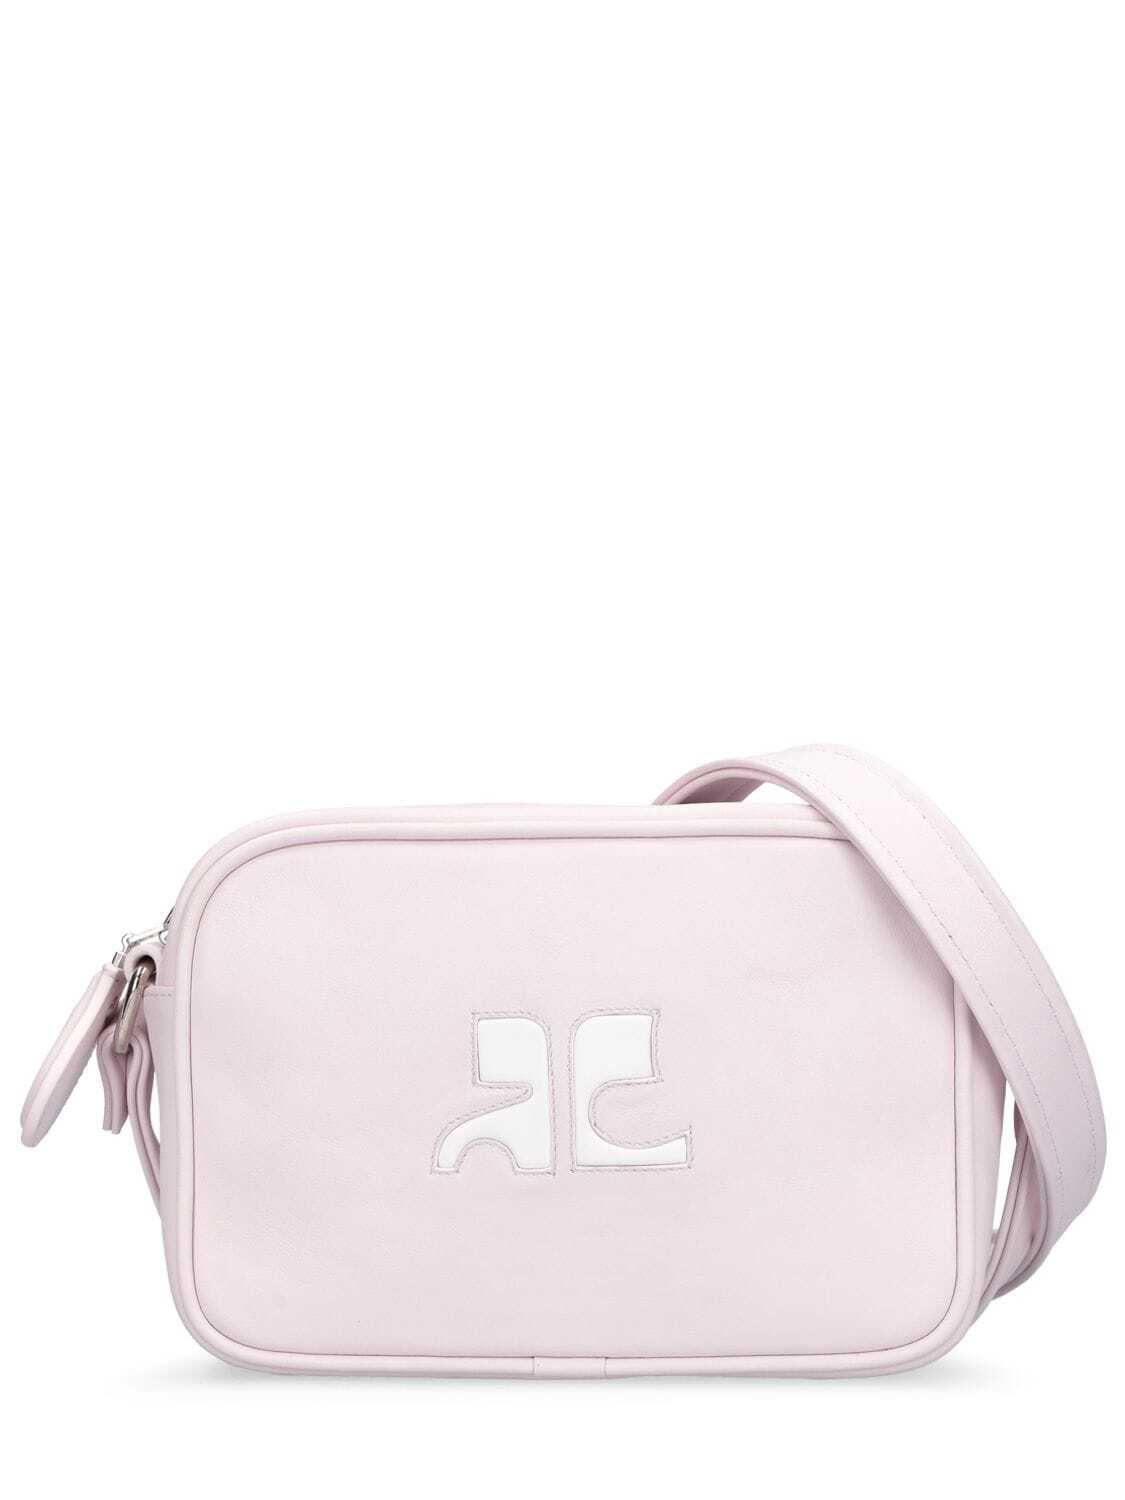 COURREGES Leather Camera Bag in pink